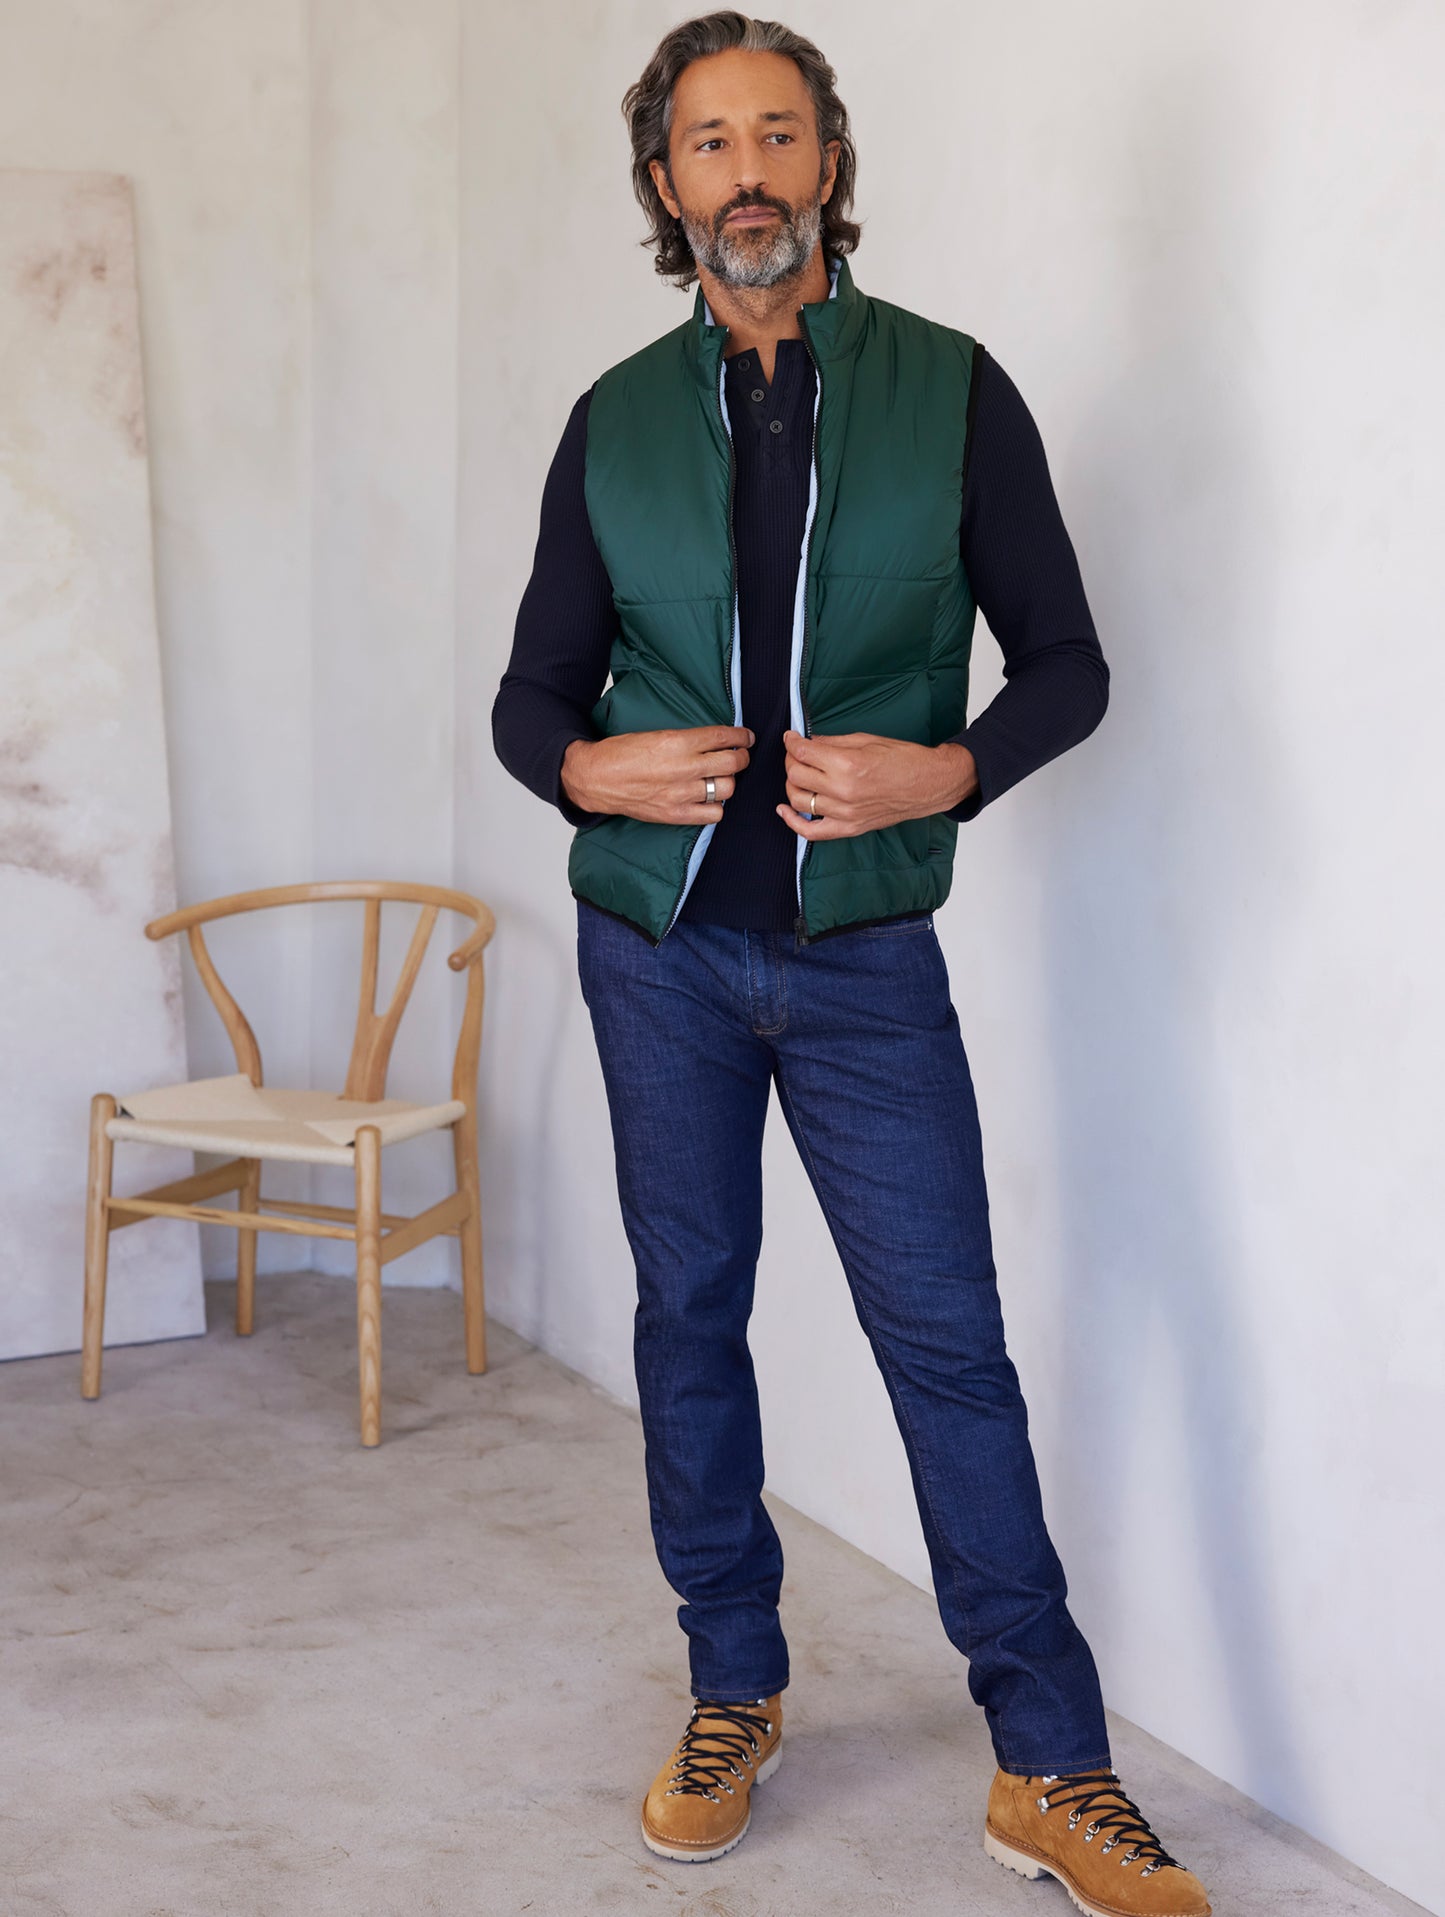 man wearing green side of reversible insulated vest